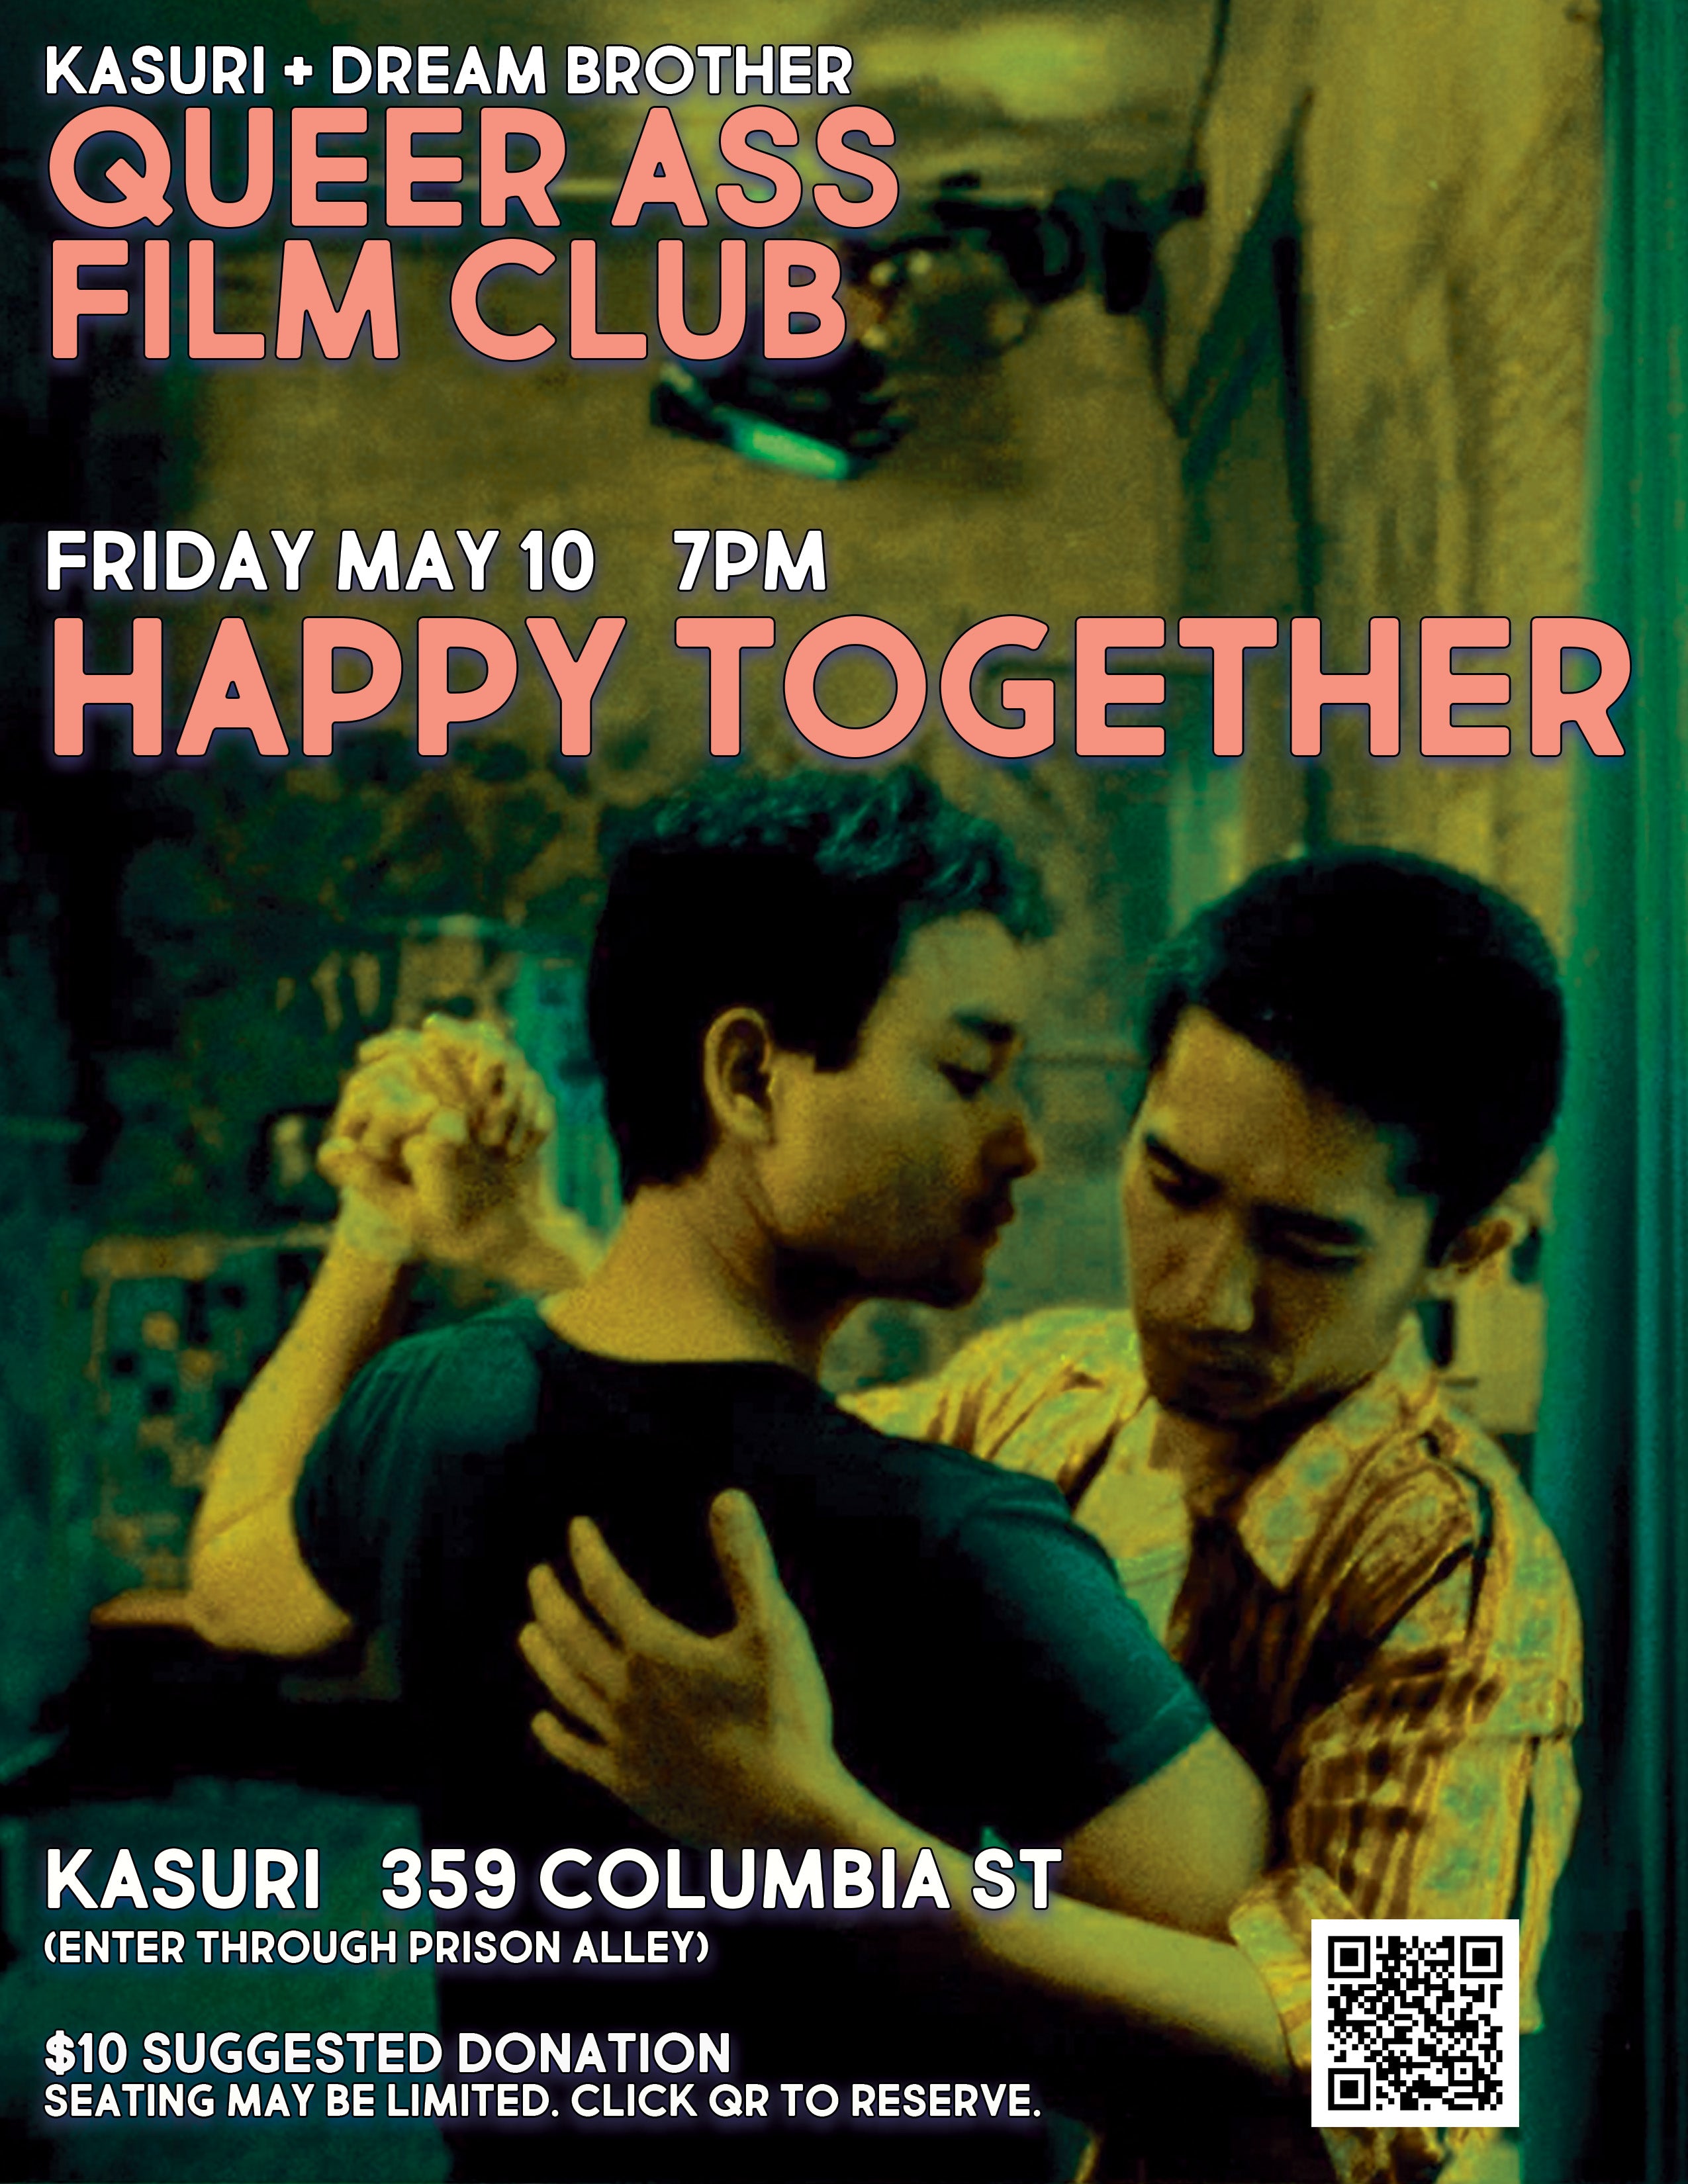 HAPPY TOGETHER Film Club Dream Brother   